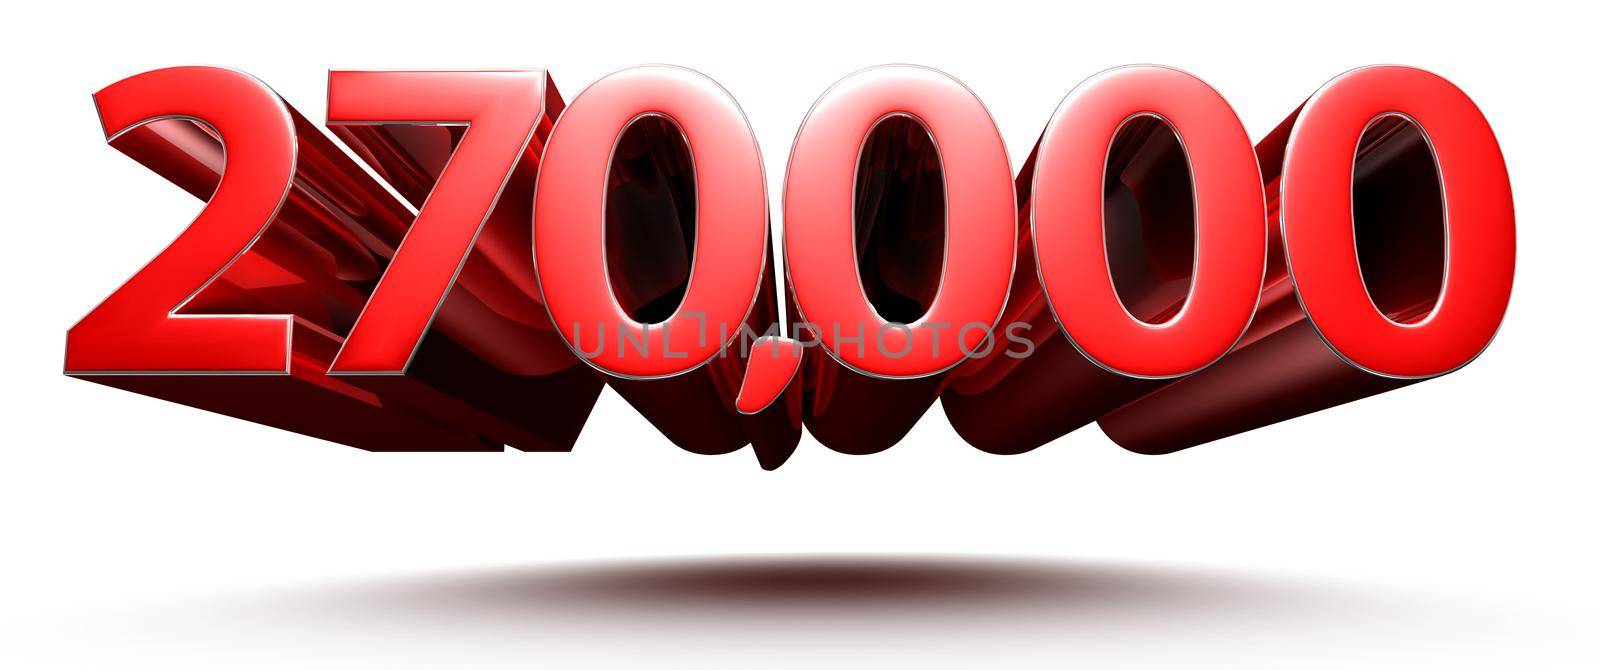 Red numbers 270000 isolated on white background illustration 3D rendering with clipping path. by thitimontoyai